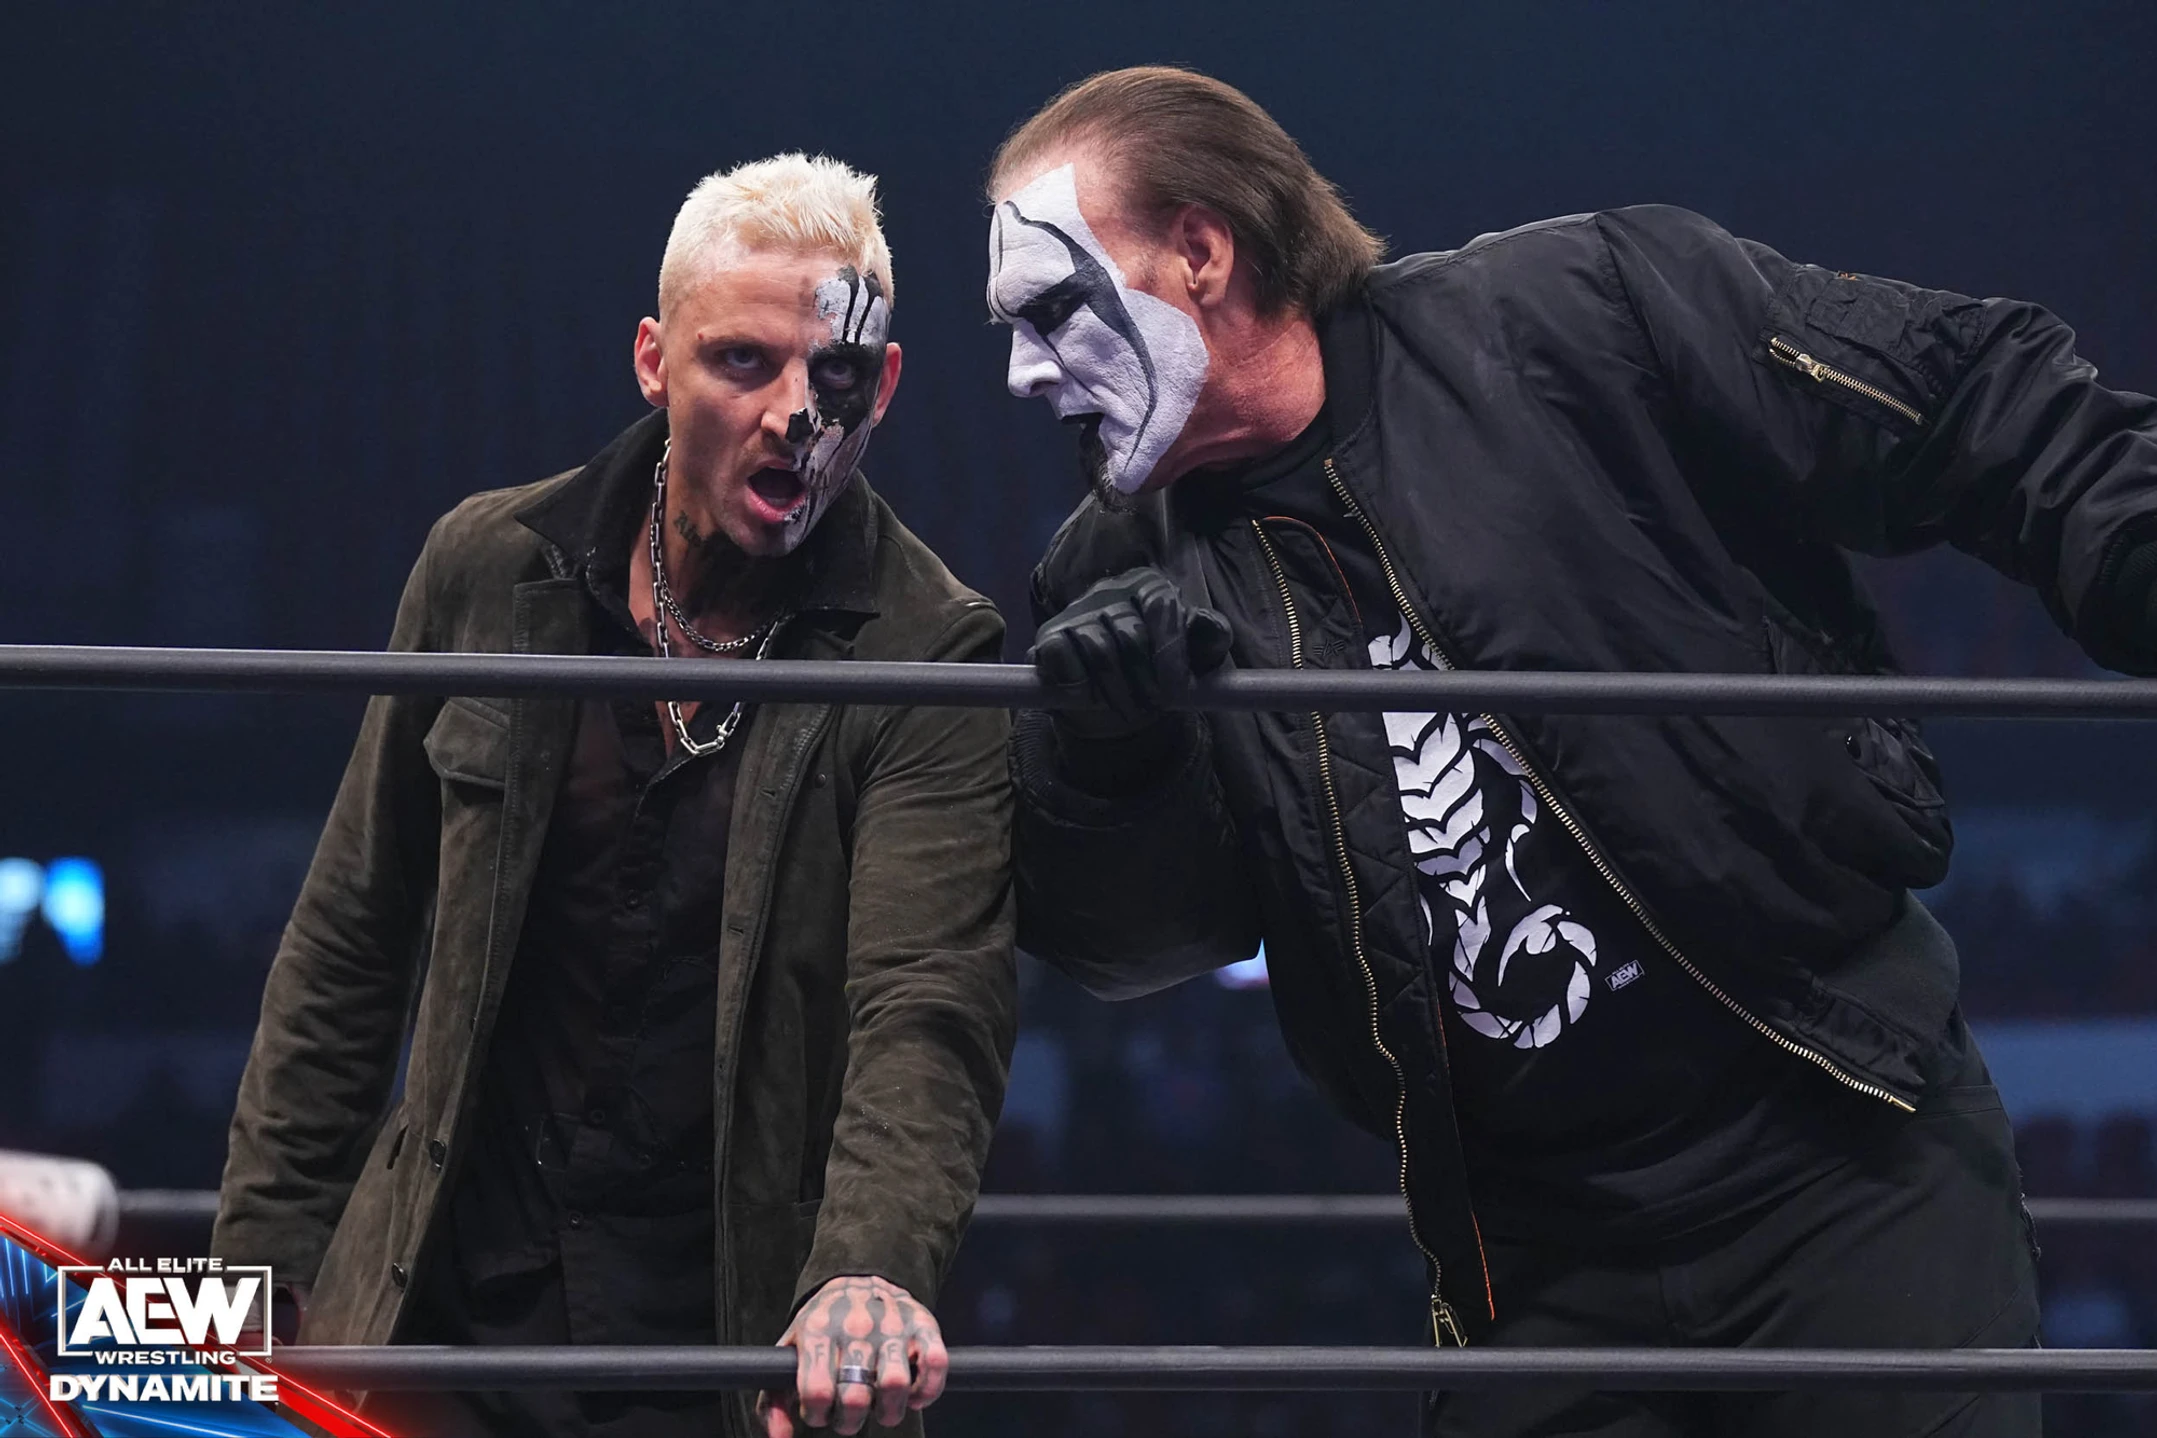 Booker T’s Response to Sting & Darby Allin’s Victory in the AEW World Tag Team Championship